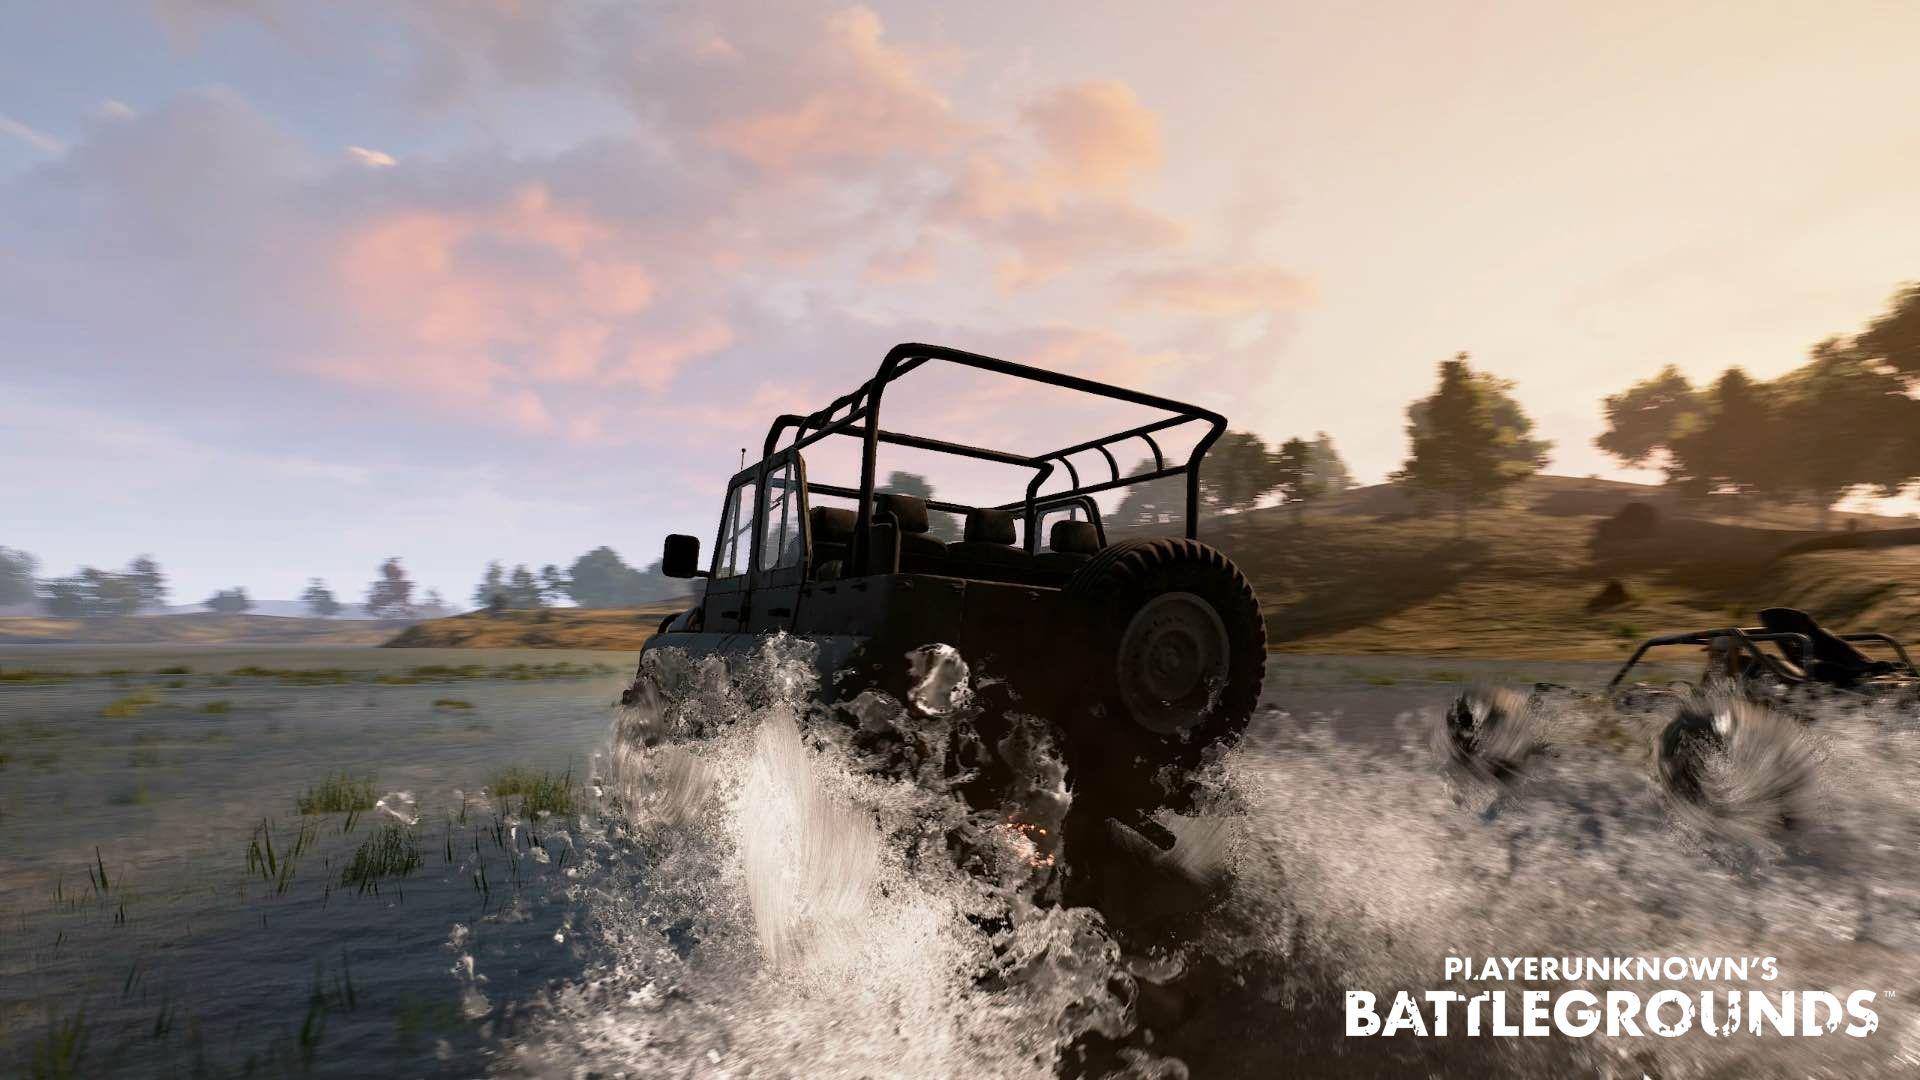 PlayerUnknown's Battlegrounds screenshots, image and picture